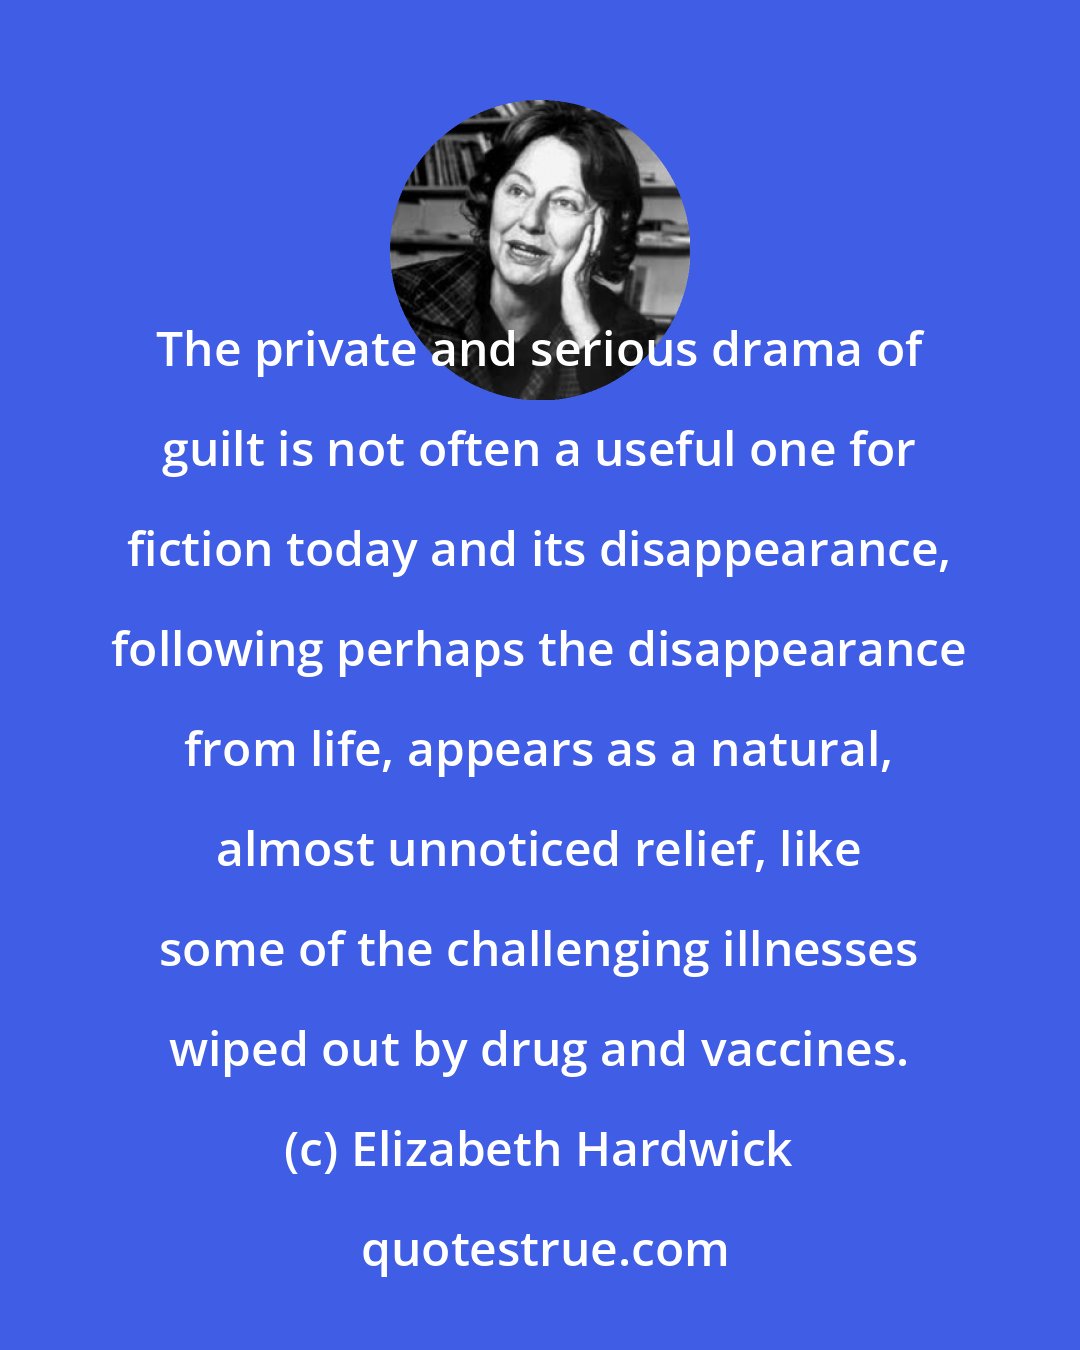 Elizabeth Hardwick: The private and serious drama of guilt is not often a useful one for fiction today and its disappearance, following perhaps the disappearance from life, appears as a natural, almost unnoticed relief, like some of the challenging illnesses wiped out by drug and vaccines.